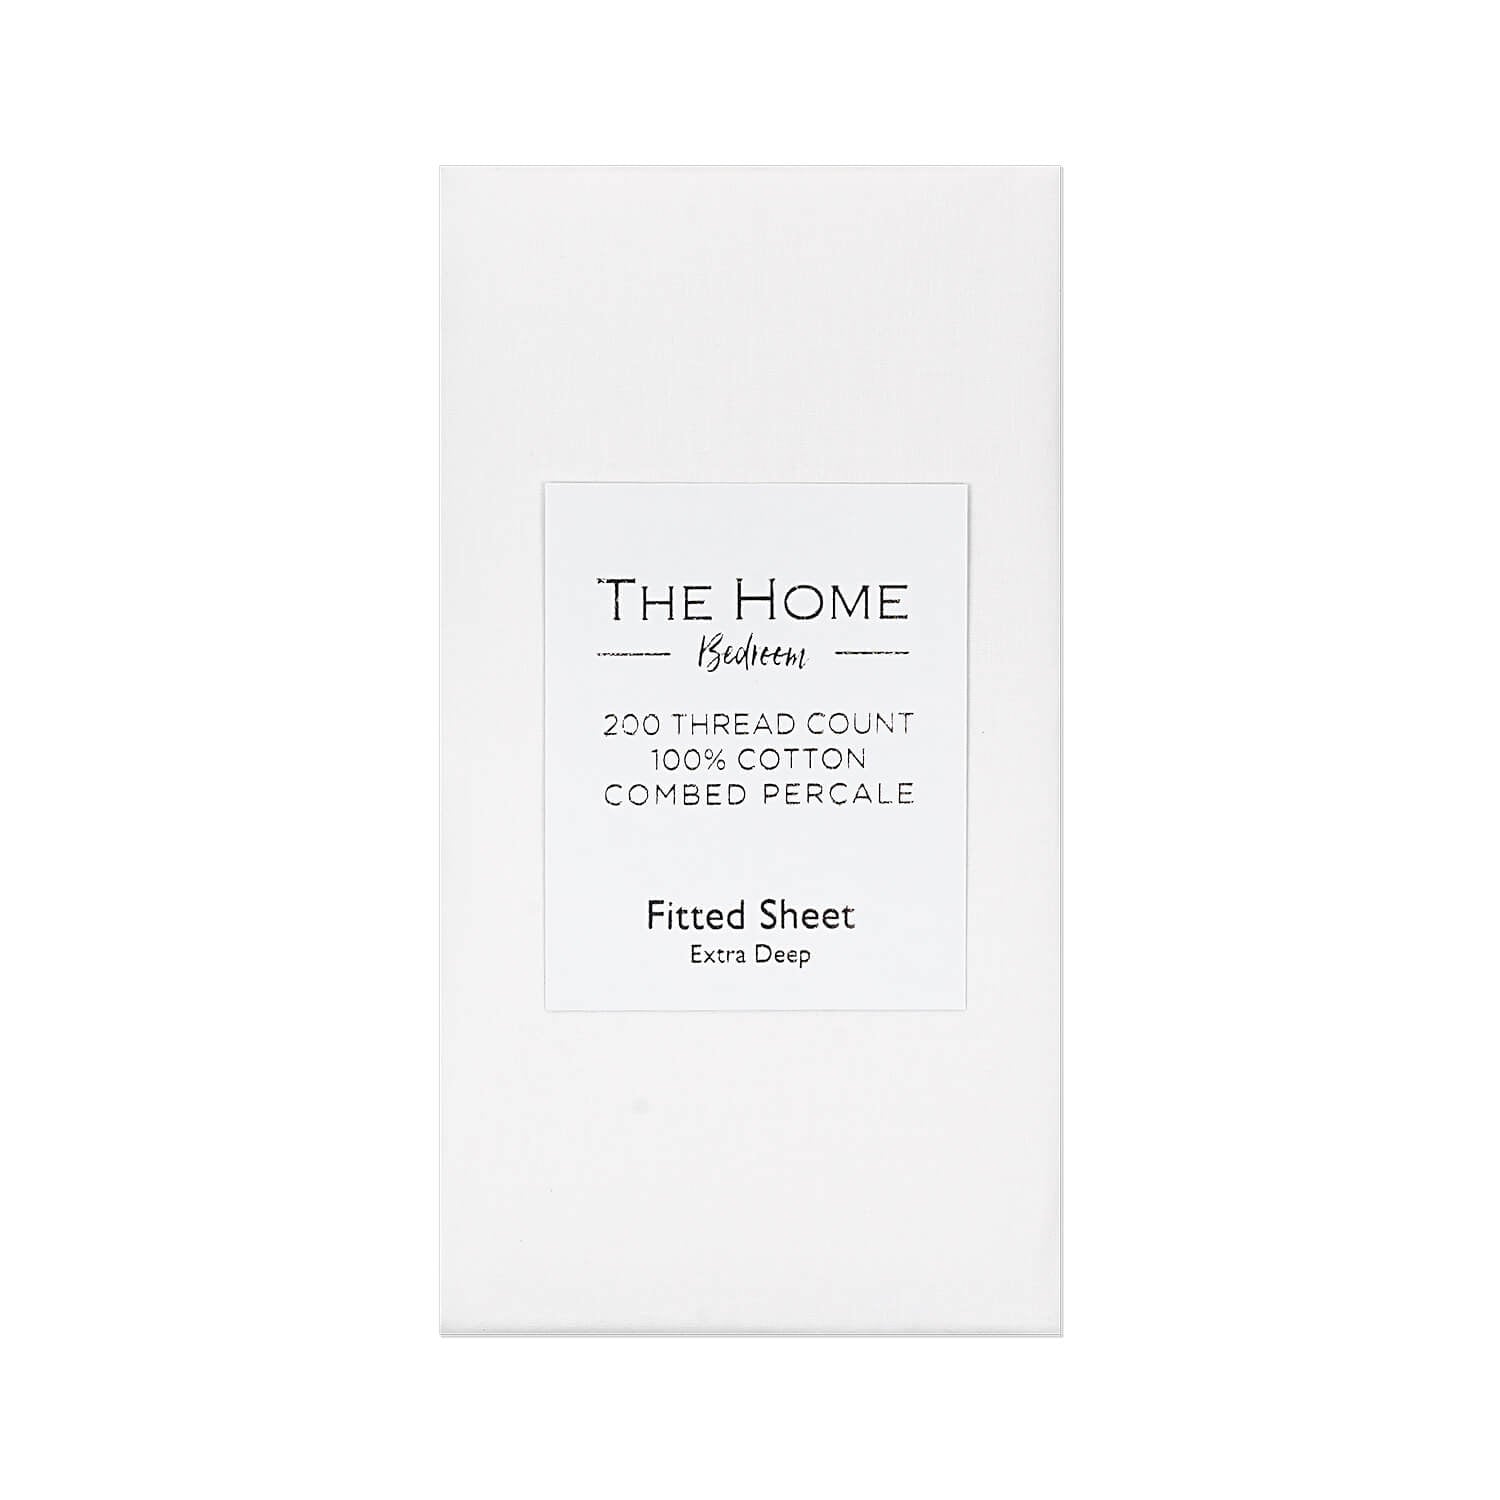 The Home Bedroom 200 Thread Count Extra Deep 100% Cotton Fitted Sheet - White 1 Shaws Department Stores